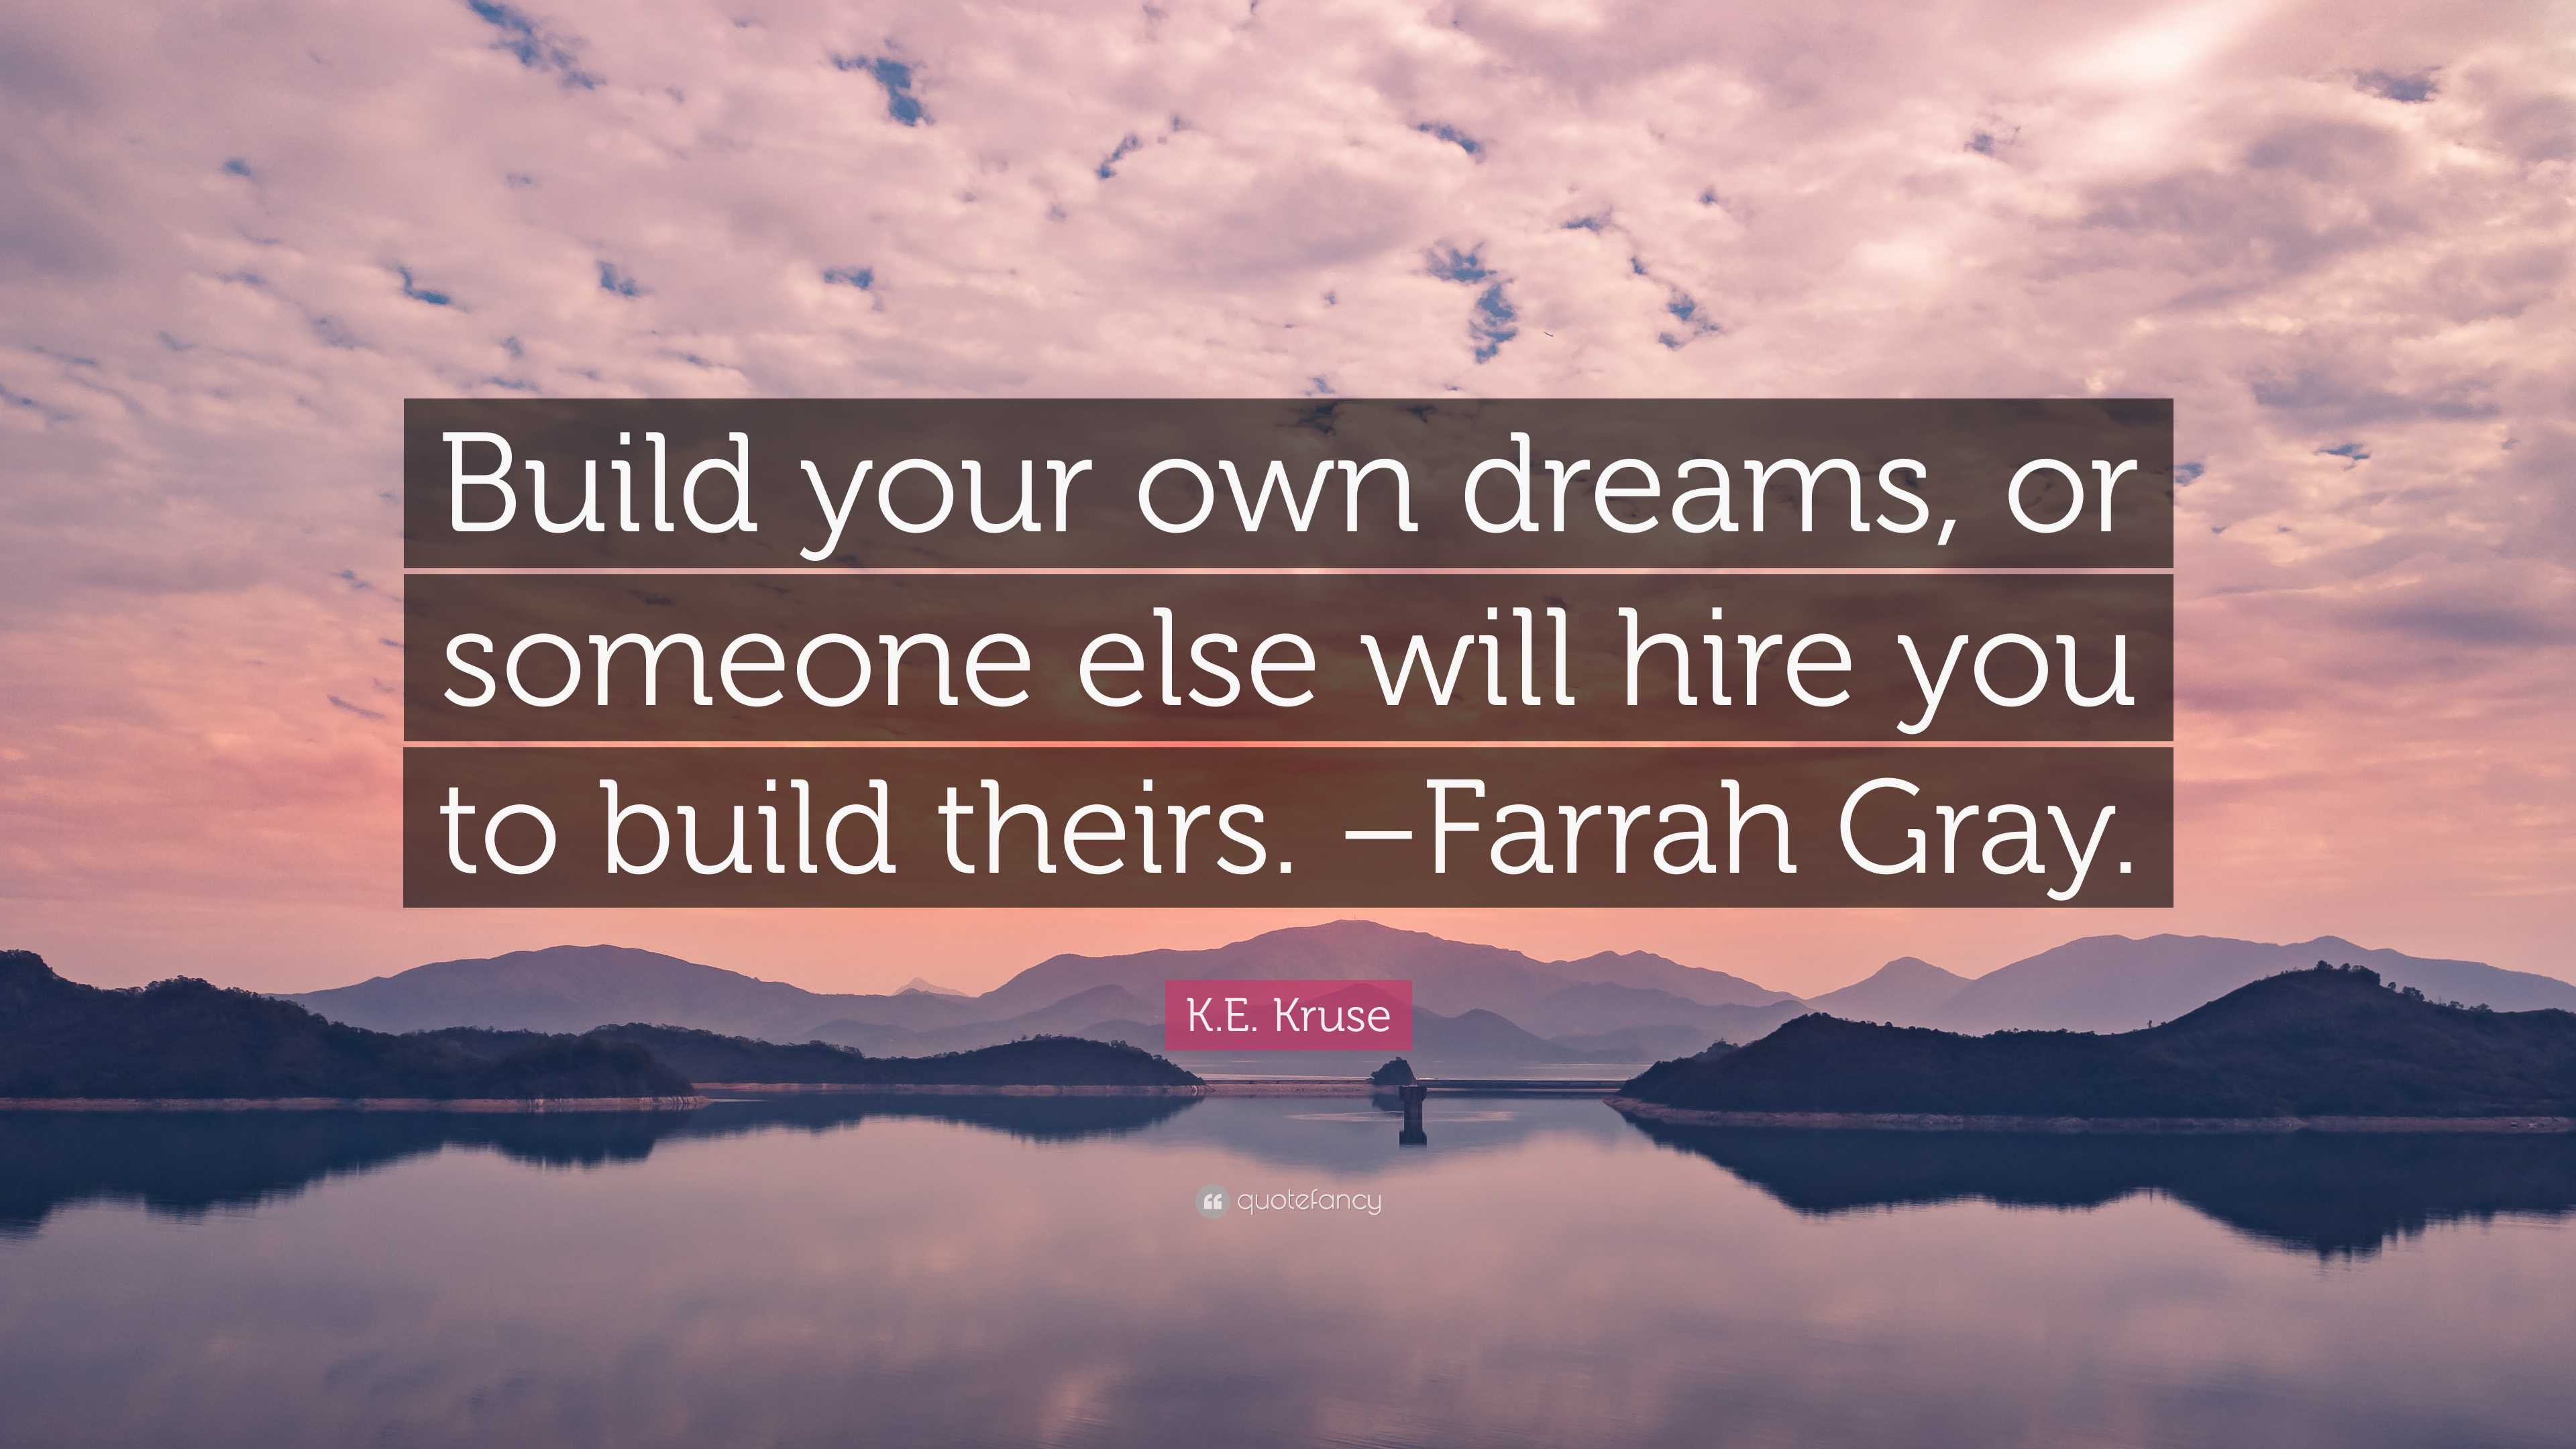 Build Your Own Dreams, Or Someone Else Will Hire You To Build Theirs.